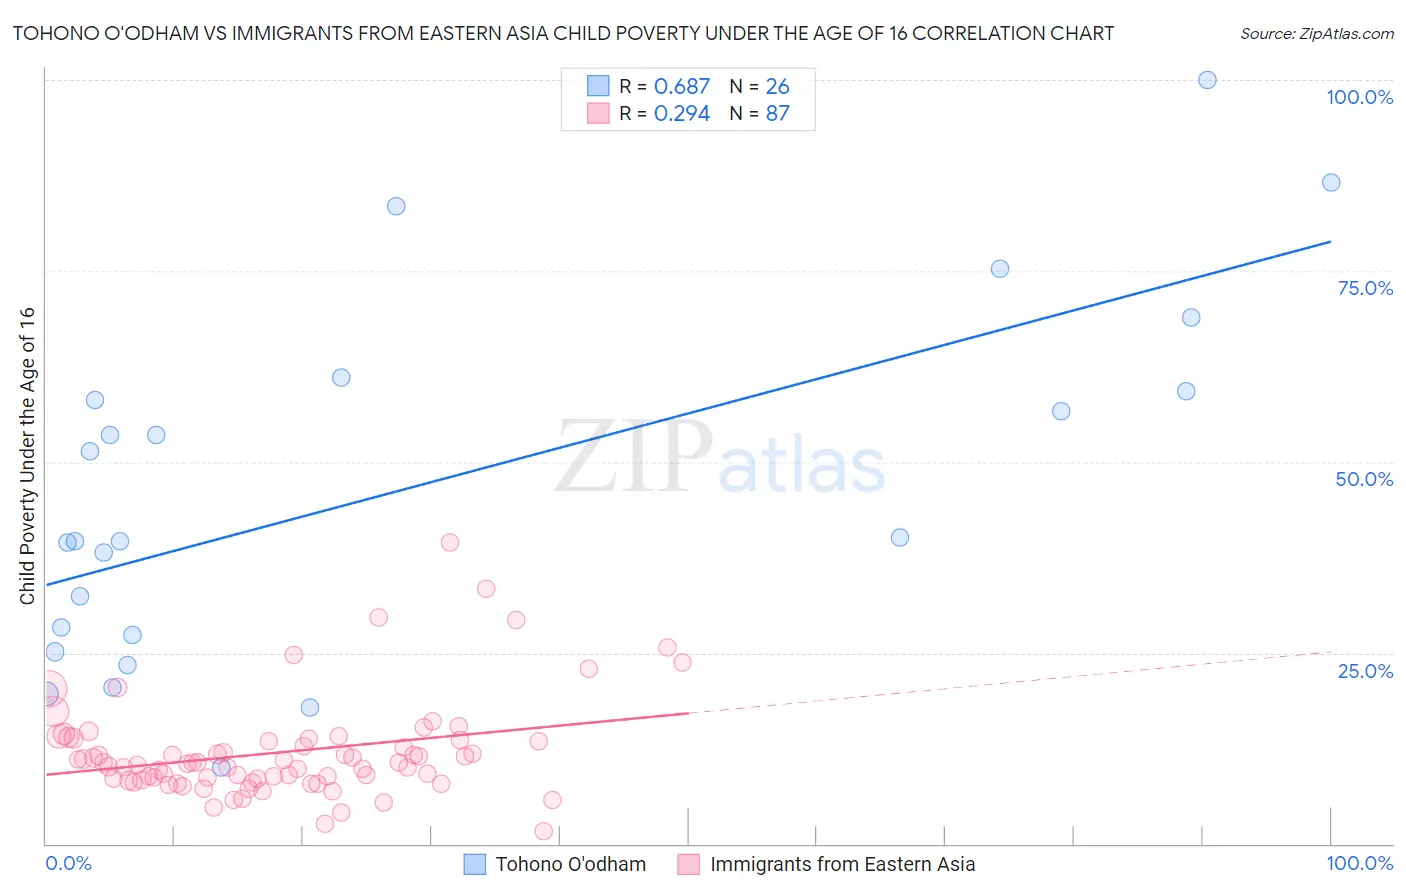 Tohono O'odham vs Immigrants from Eastern Asia Child Poverty Under the Age of 16